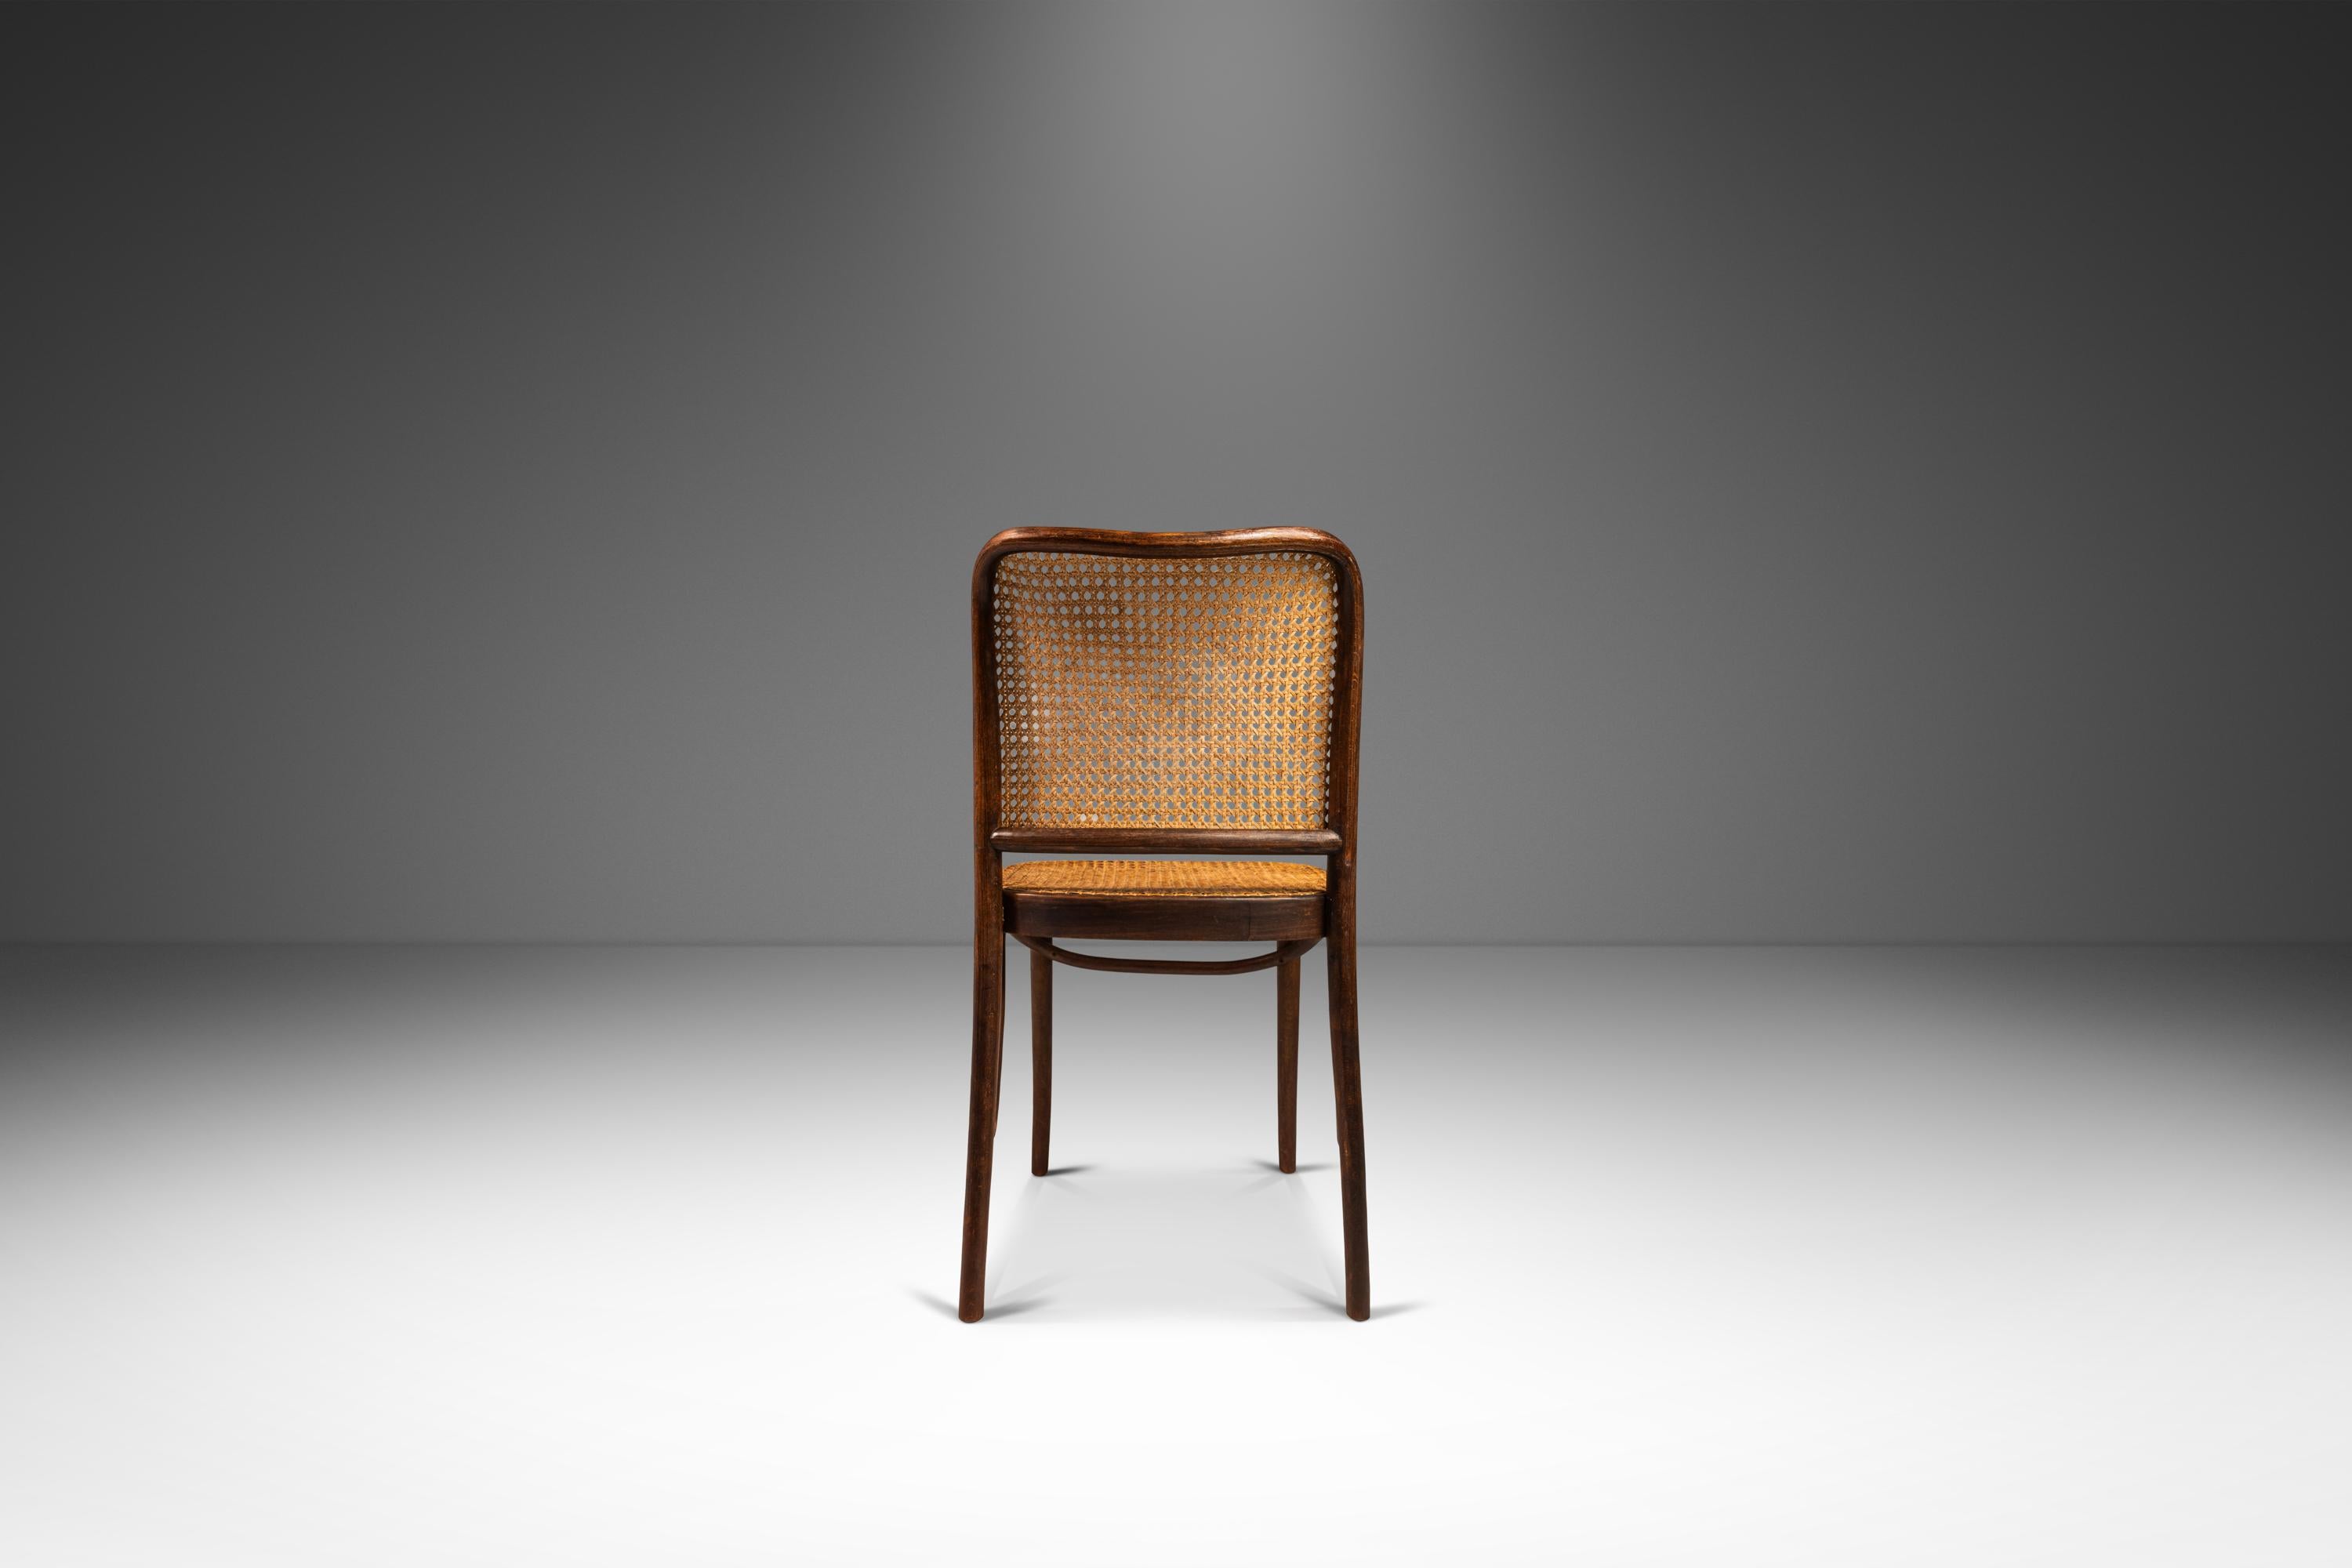 Mid-20th Century Bentwood Prague Model 811 Chair in Walnut by Josef Frank, Poland, c. 1960s For Sale